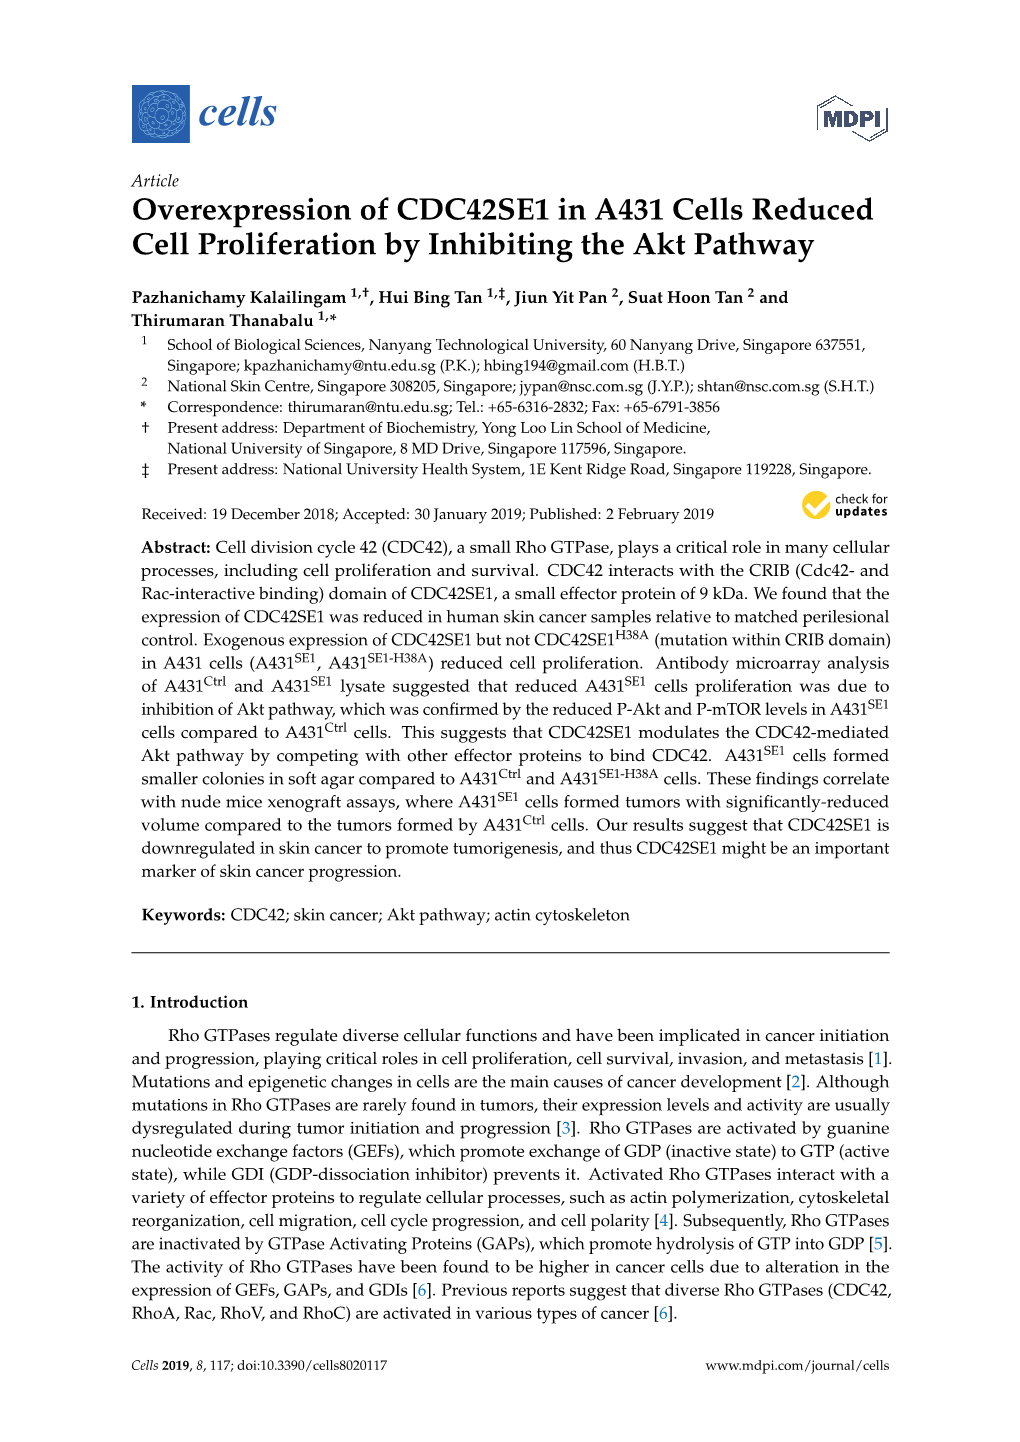 Overexpression of CDC42SE1 in A431 Cells Reduced Cell Proliferation by Inhibiting the Akt Pathway